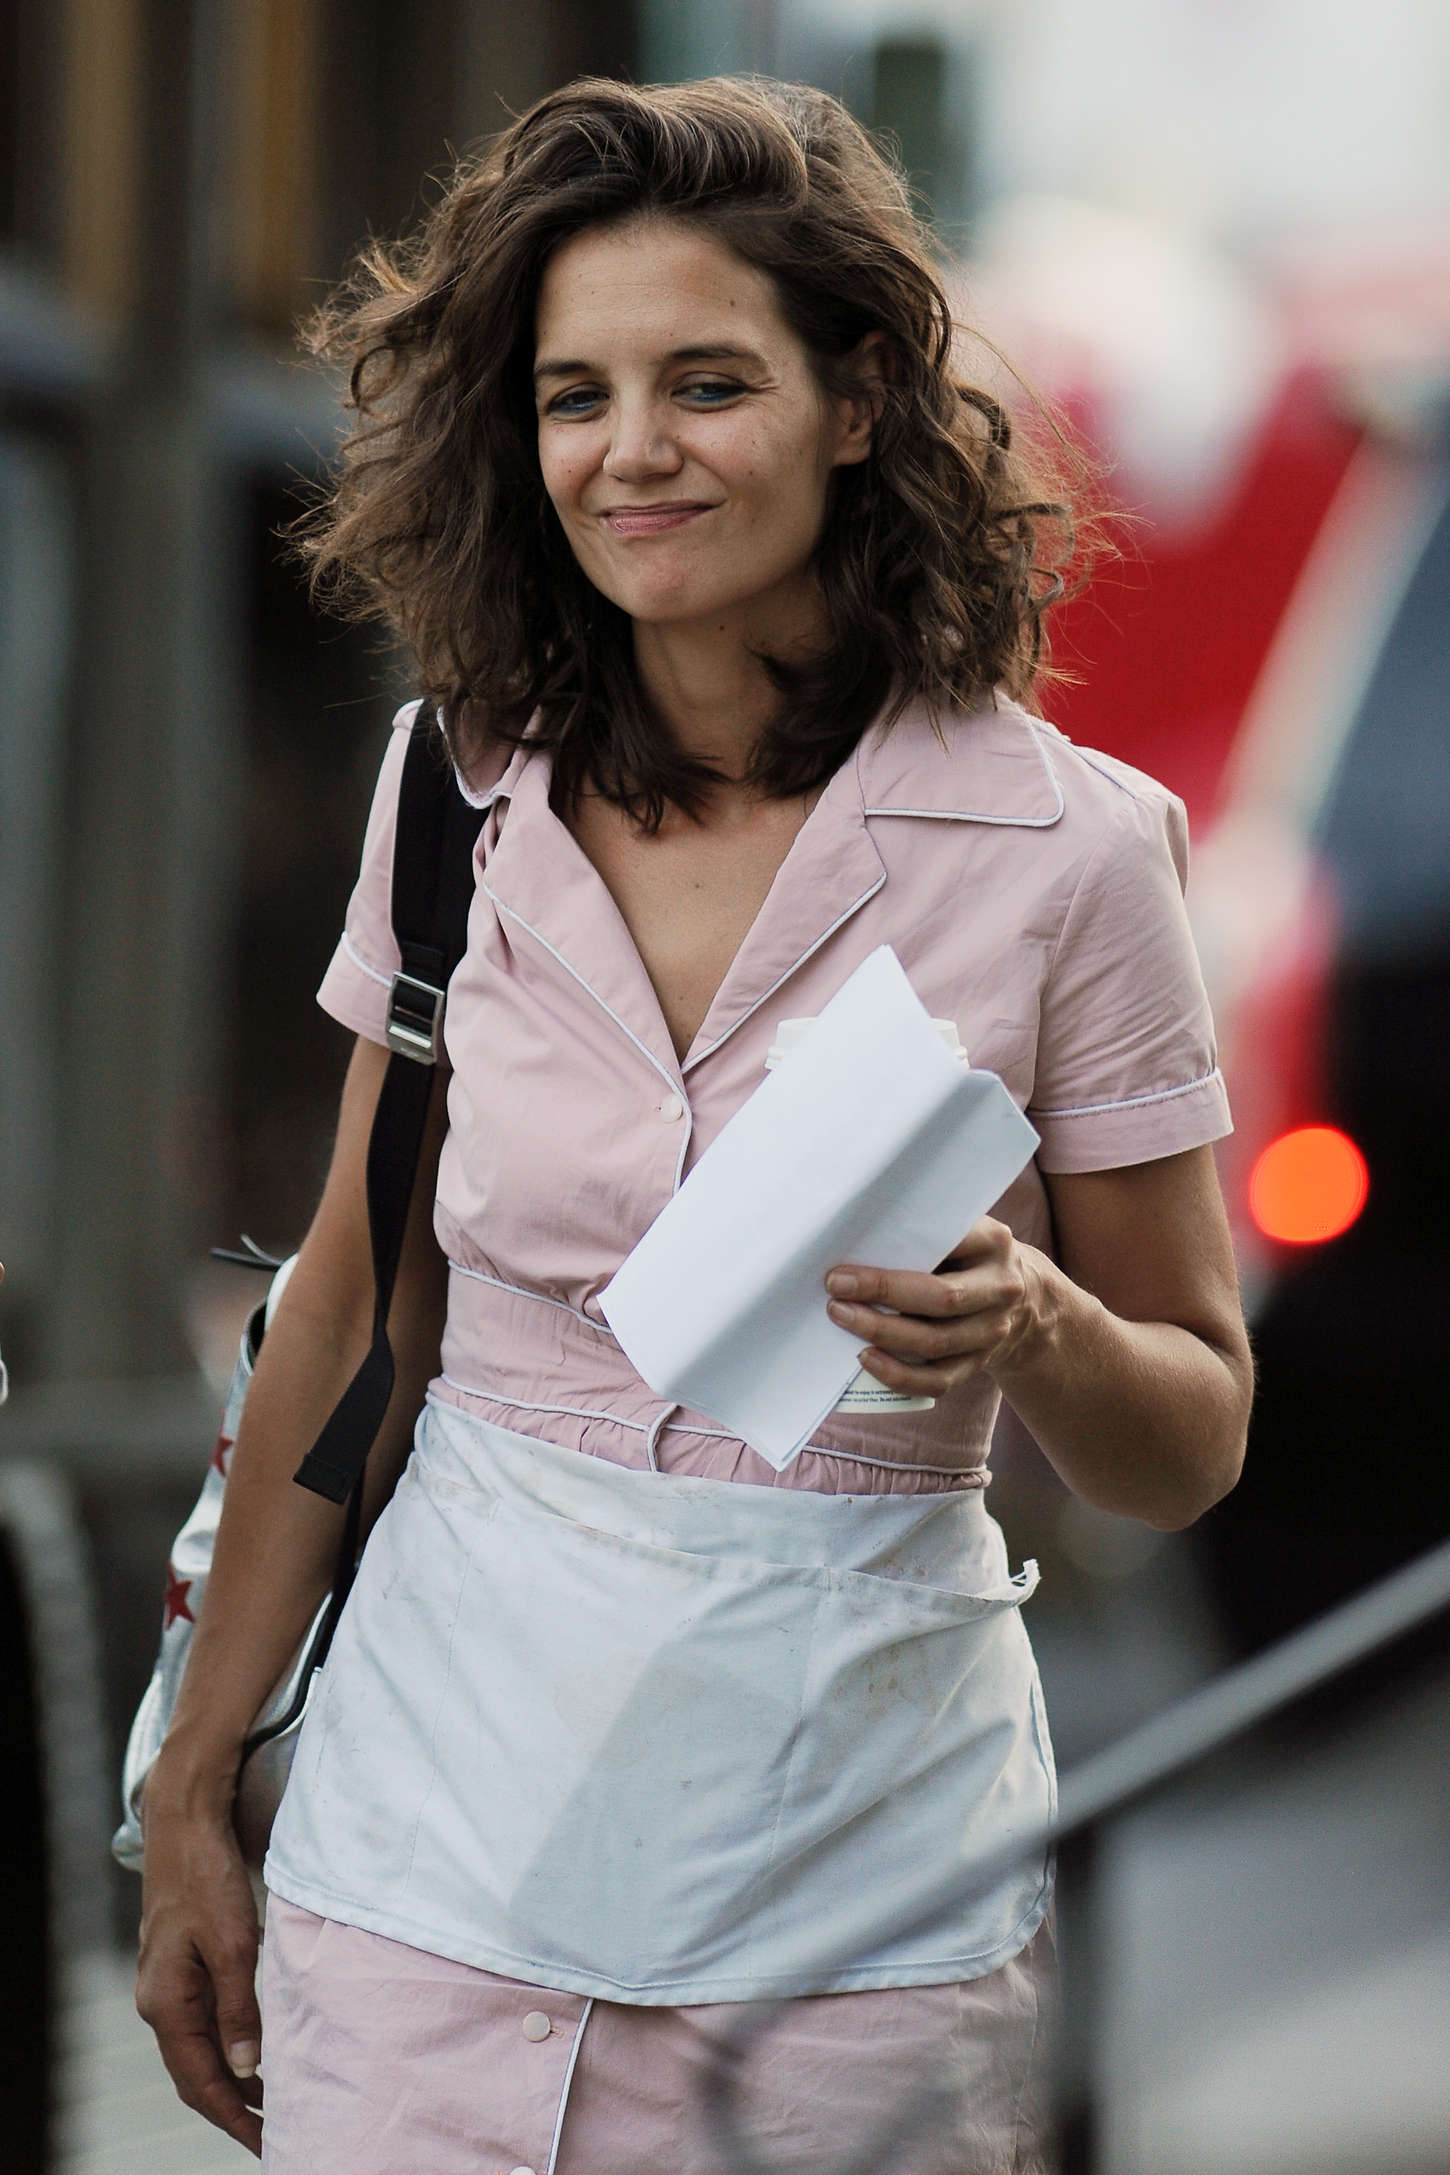 Katie Holmes - On the set of 'All We Had' in NY